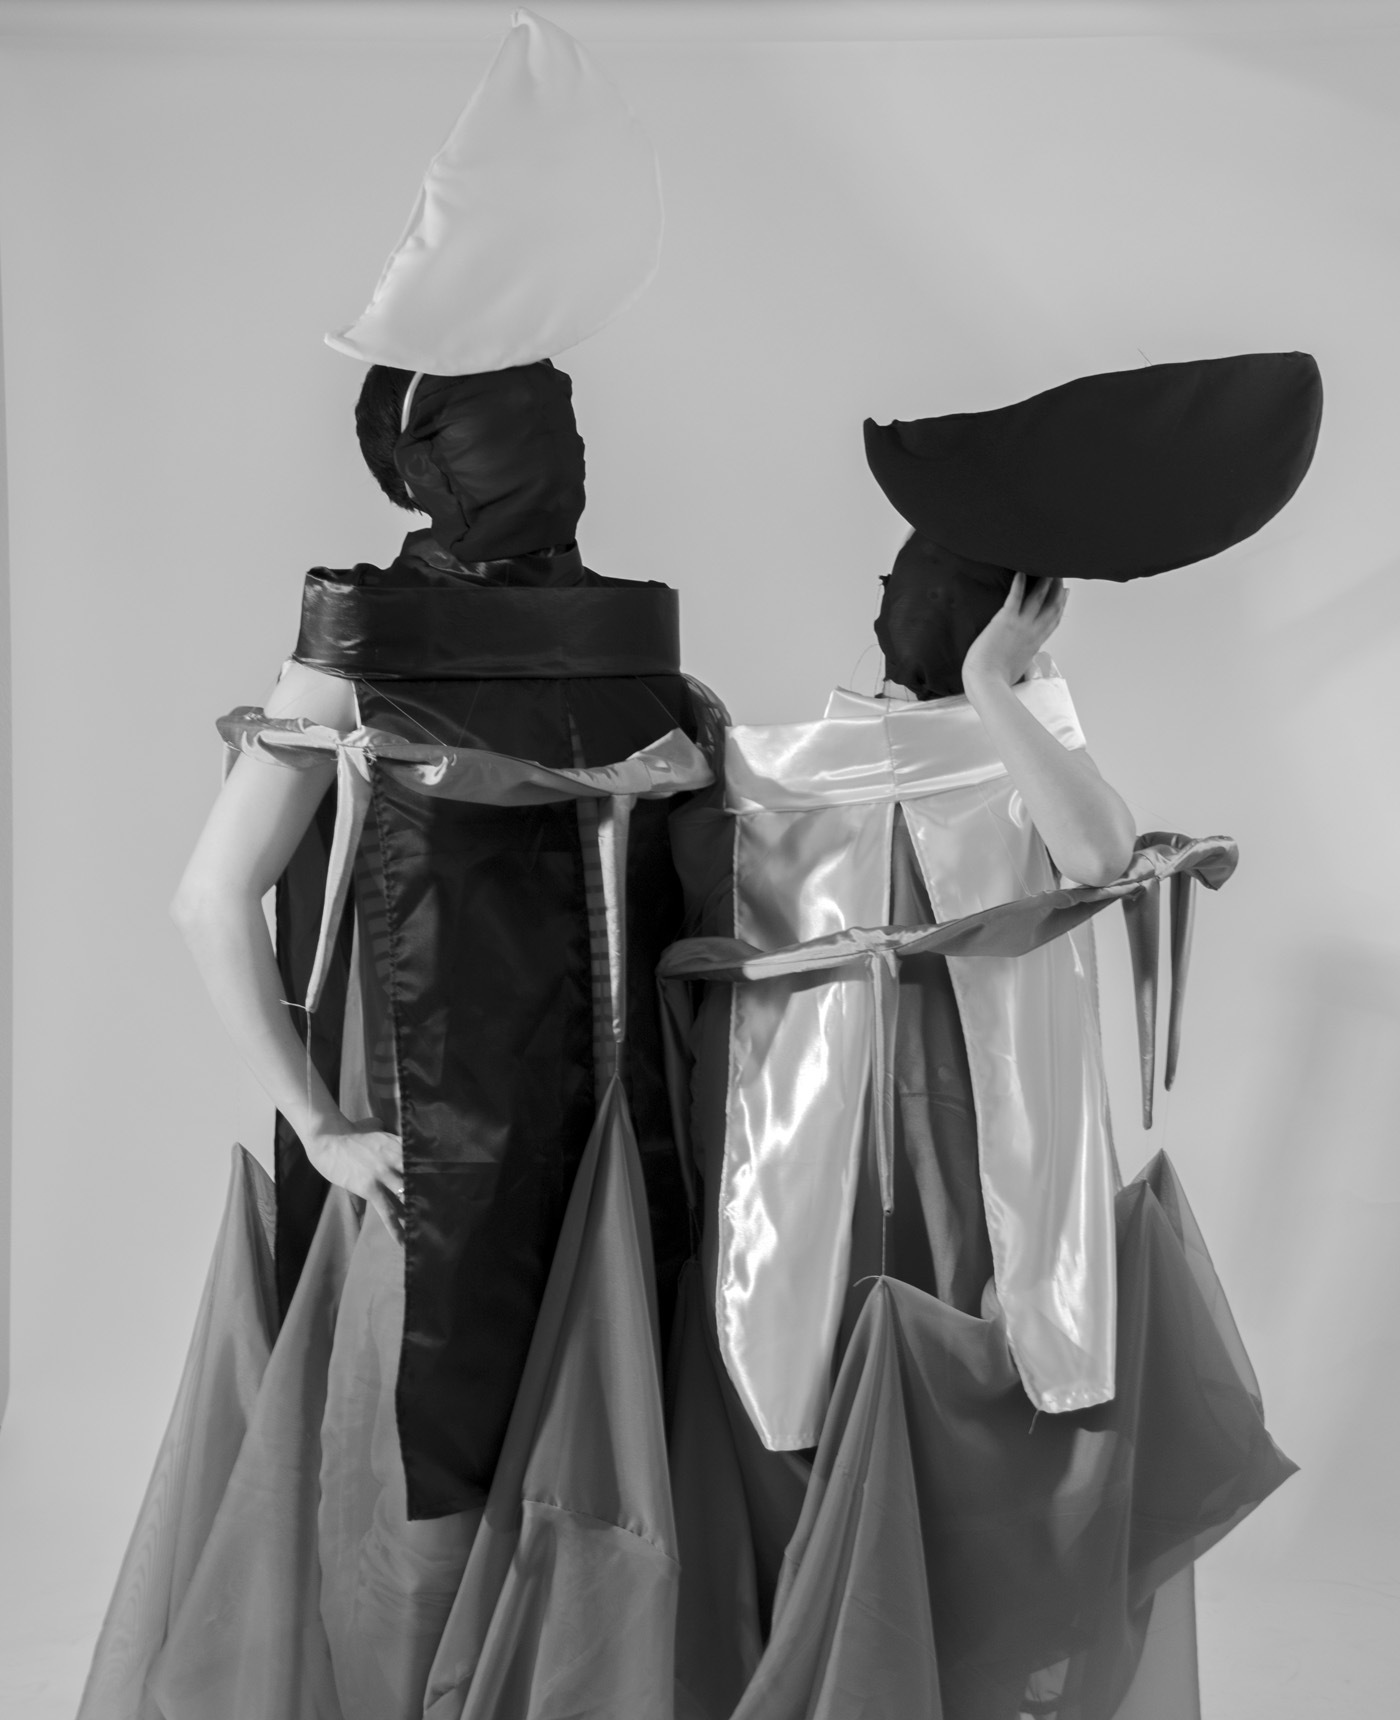 0:00 is the culmination of the entire ANDROGYNE collection. Two figures stand joined by fabric—one wearing white and the other wearing black. Each wears a hat with half-moon on top. It represents the intersection between the two traditionally recognized genders and proposes a joining of them to create an androgyne identity.